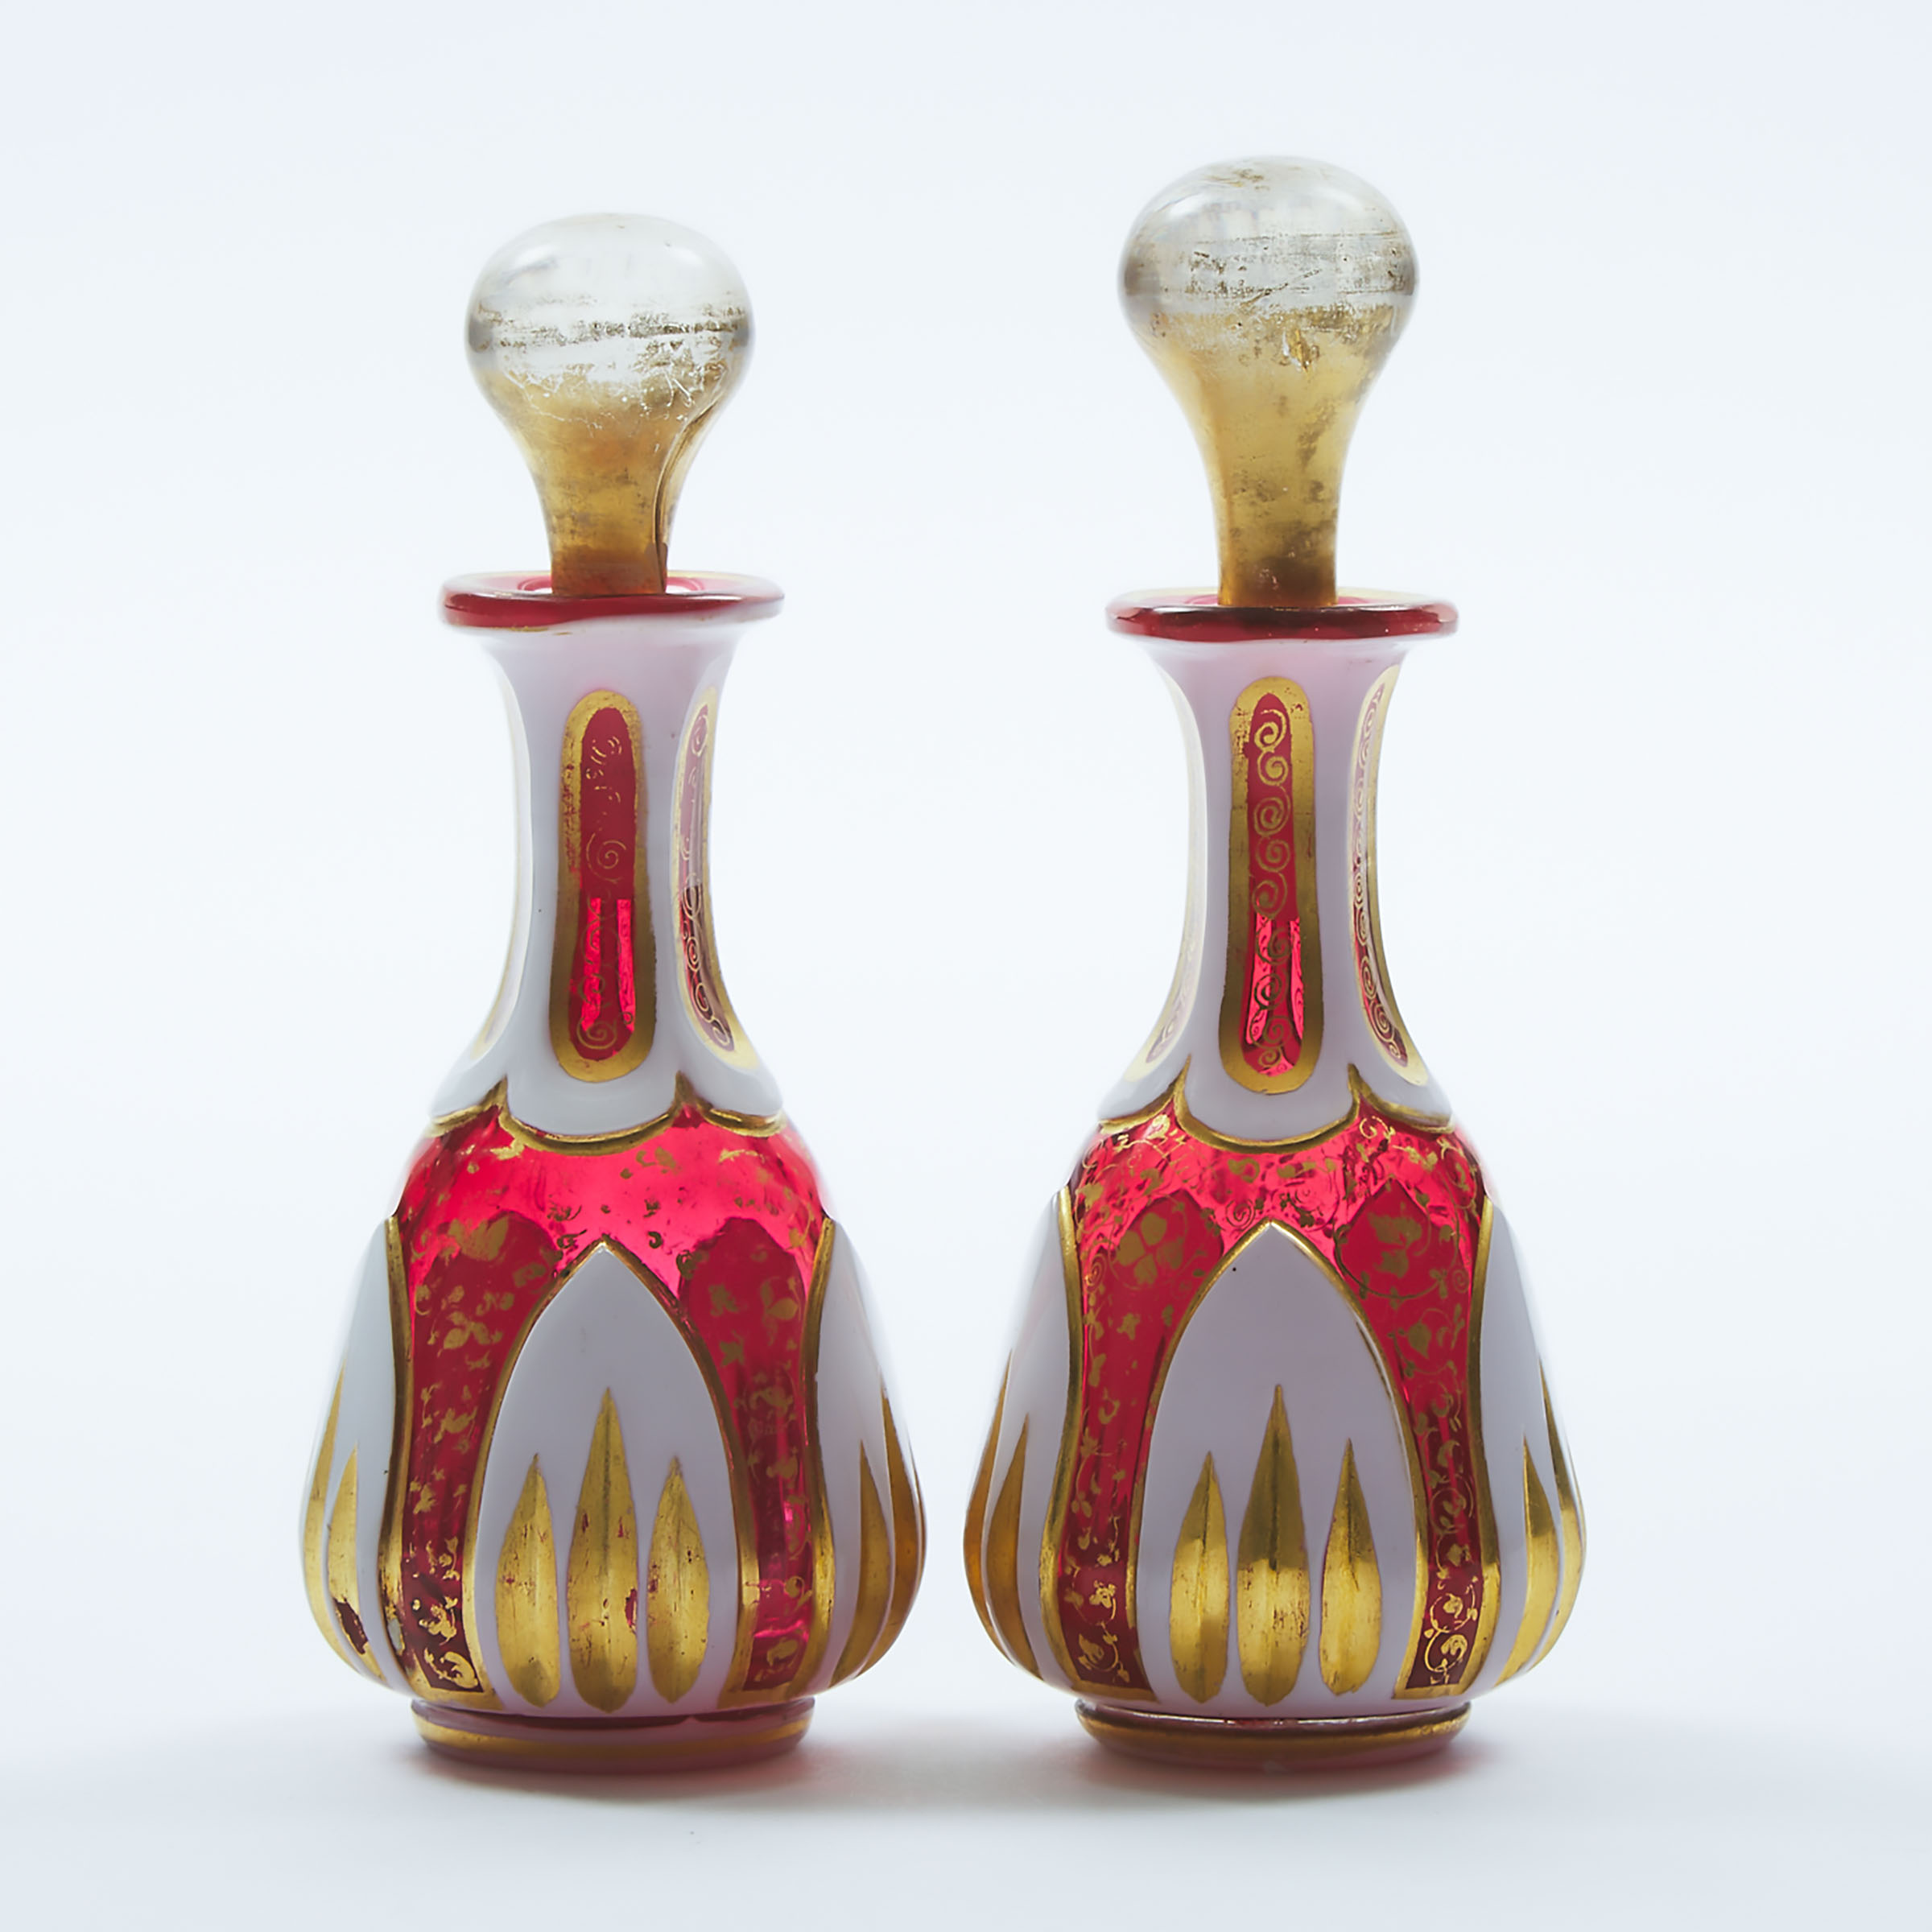 Pair of Bohemian Overlaid, Cut and Gilt Red Glass Perfume Bottles, late 19th century